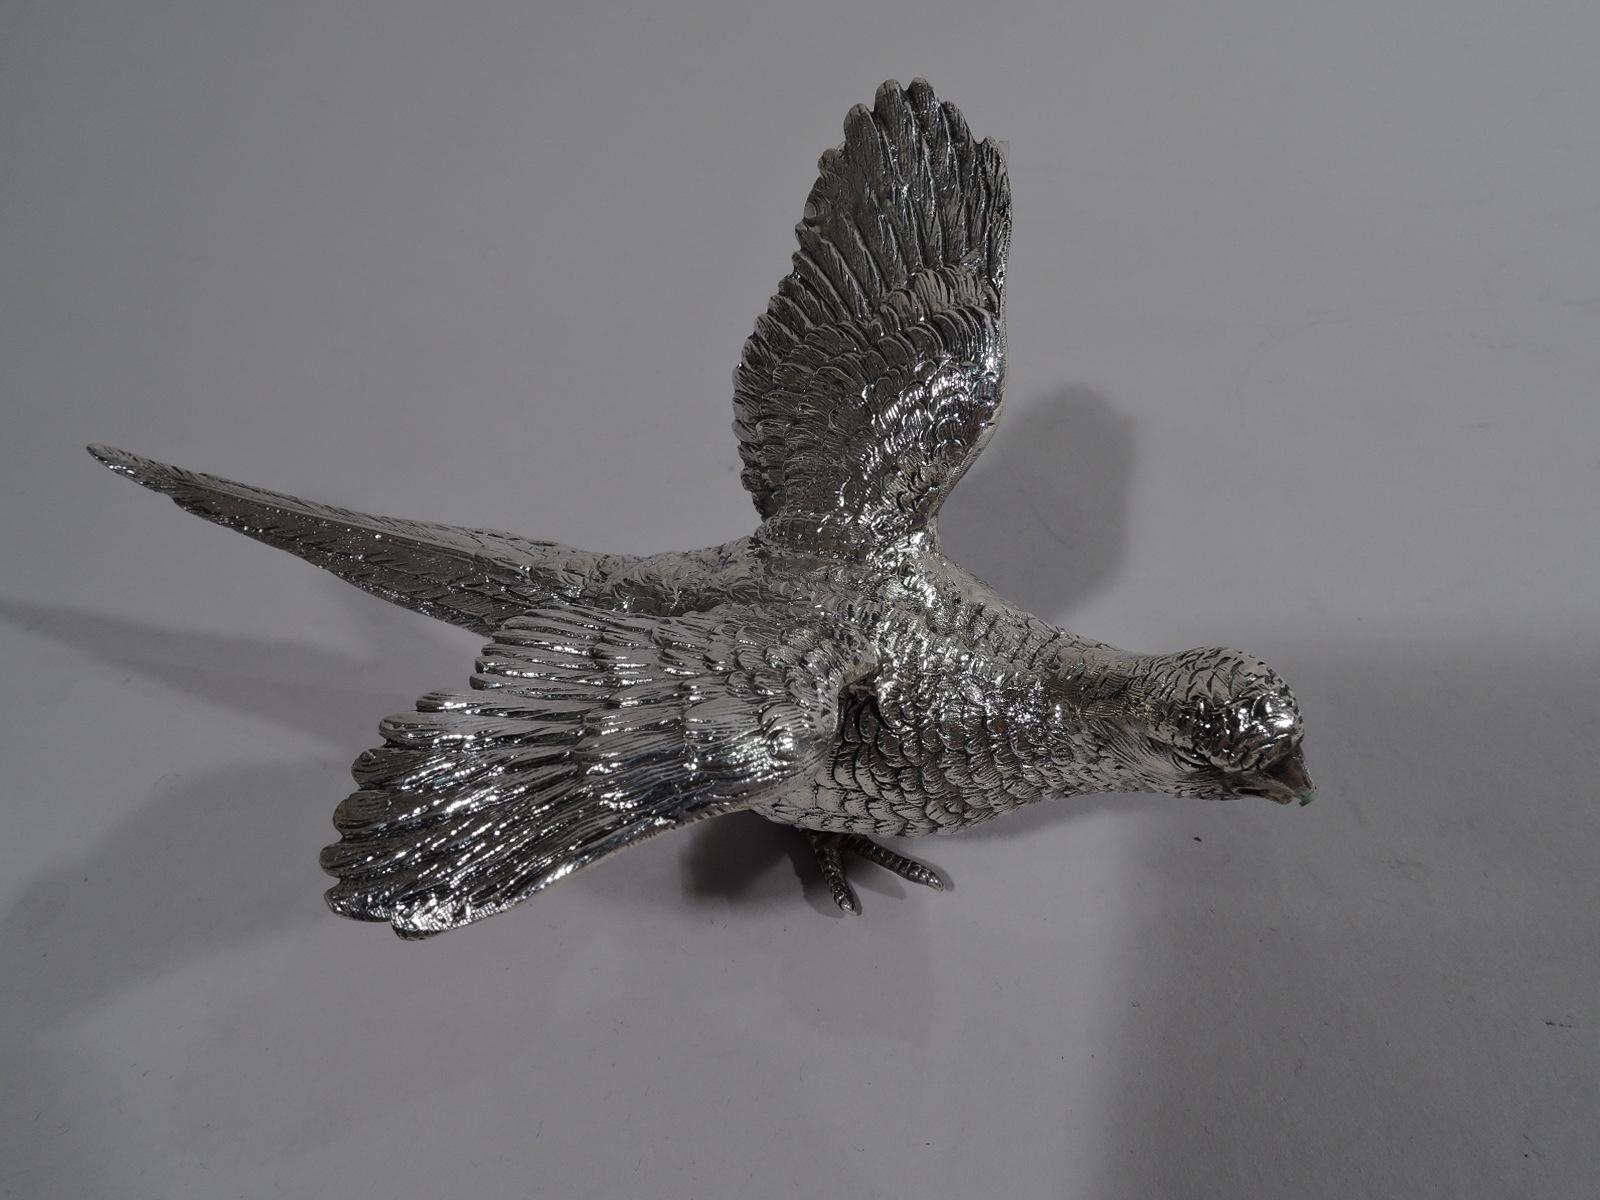 Traditional sterling silver pheasant, circa 1920. A small wing-flapping bird with scaly talons and fine plumage. Marked “925 Sterling” with German maker’s stamp (Ludwig Neresheimer).